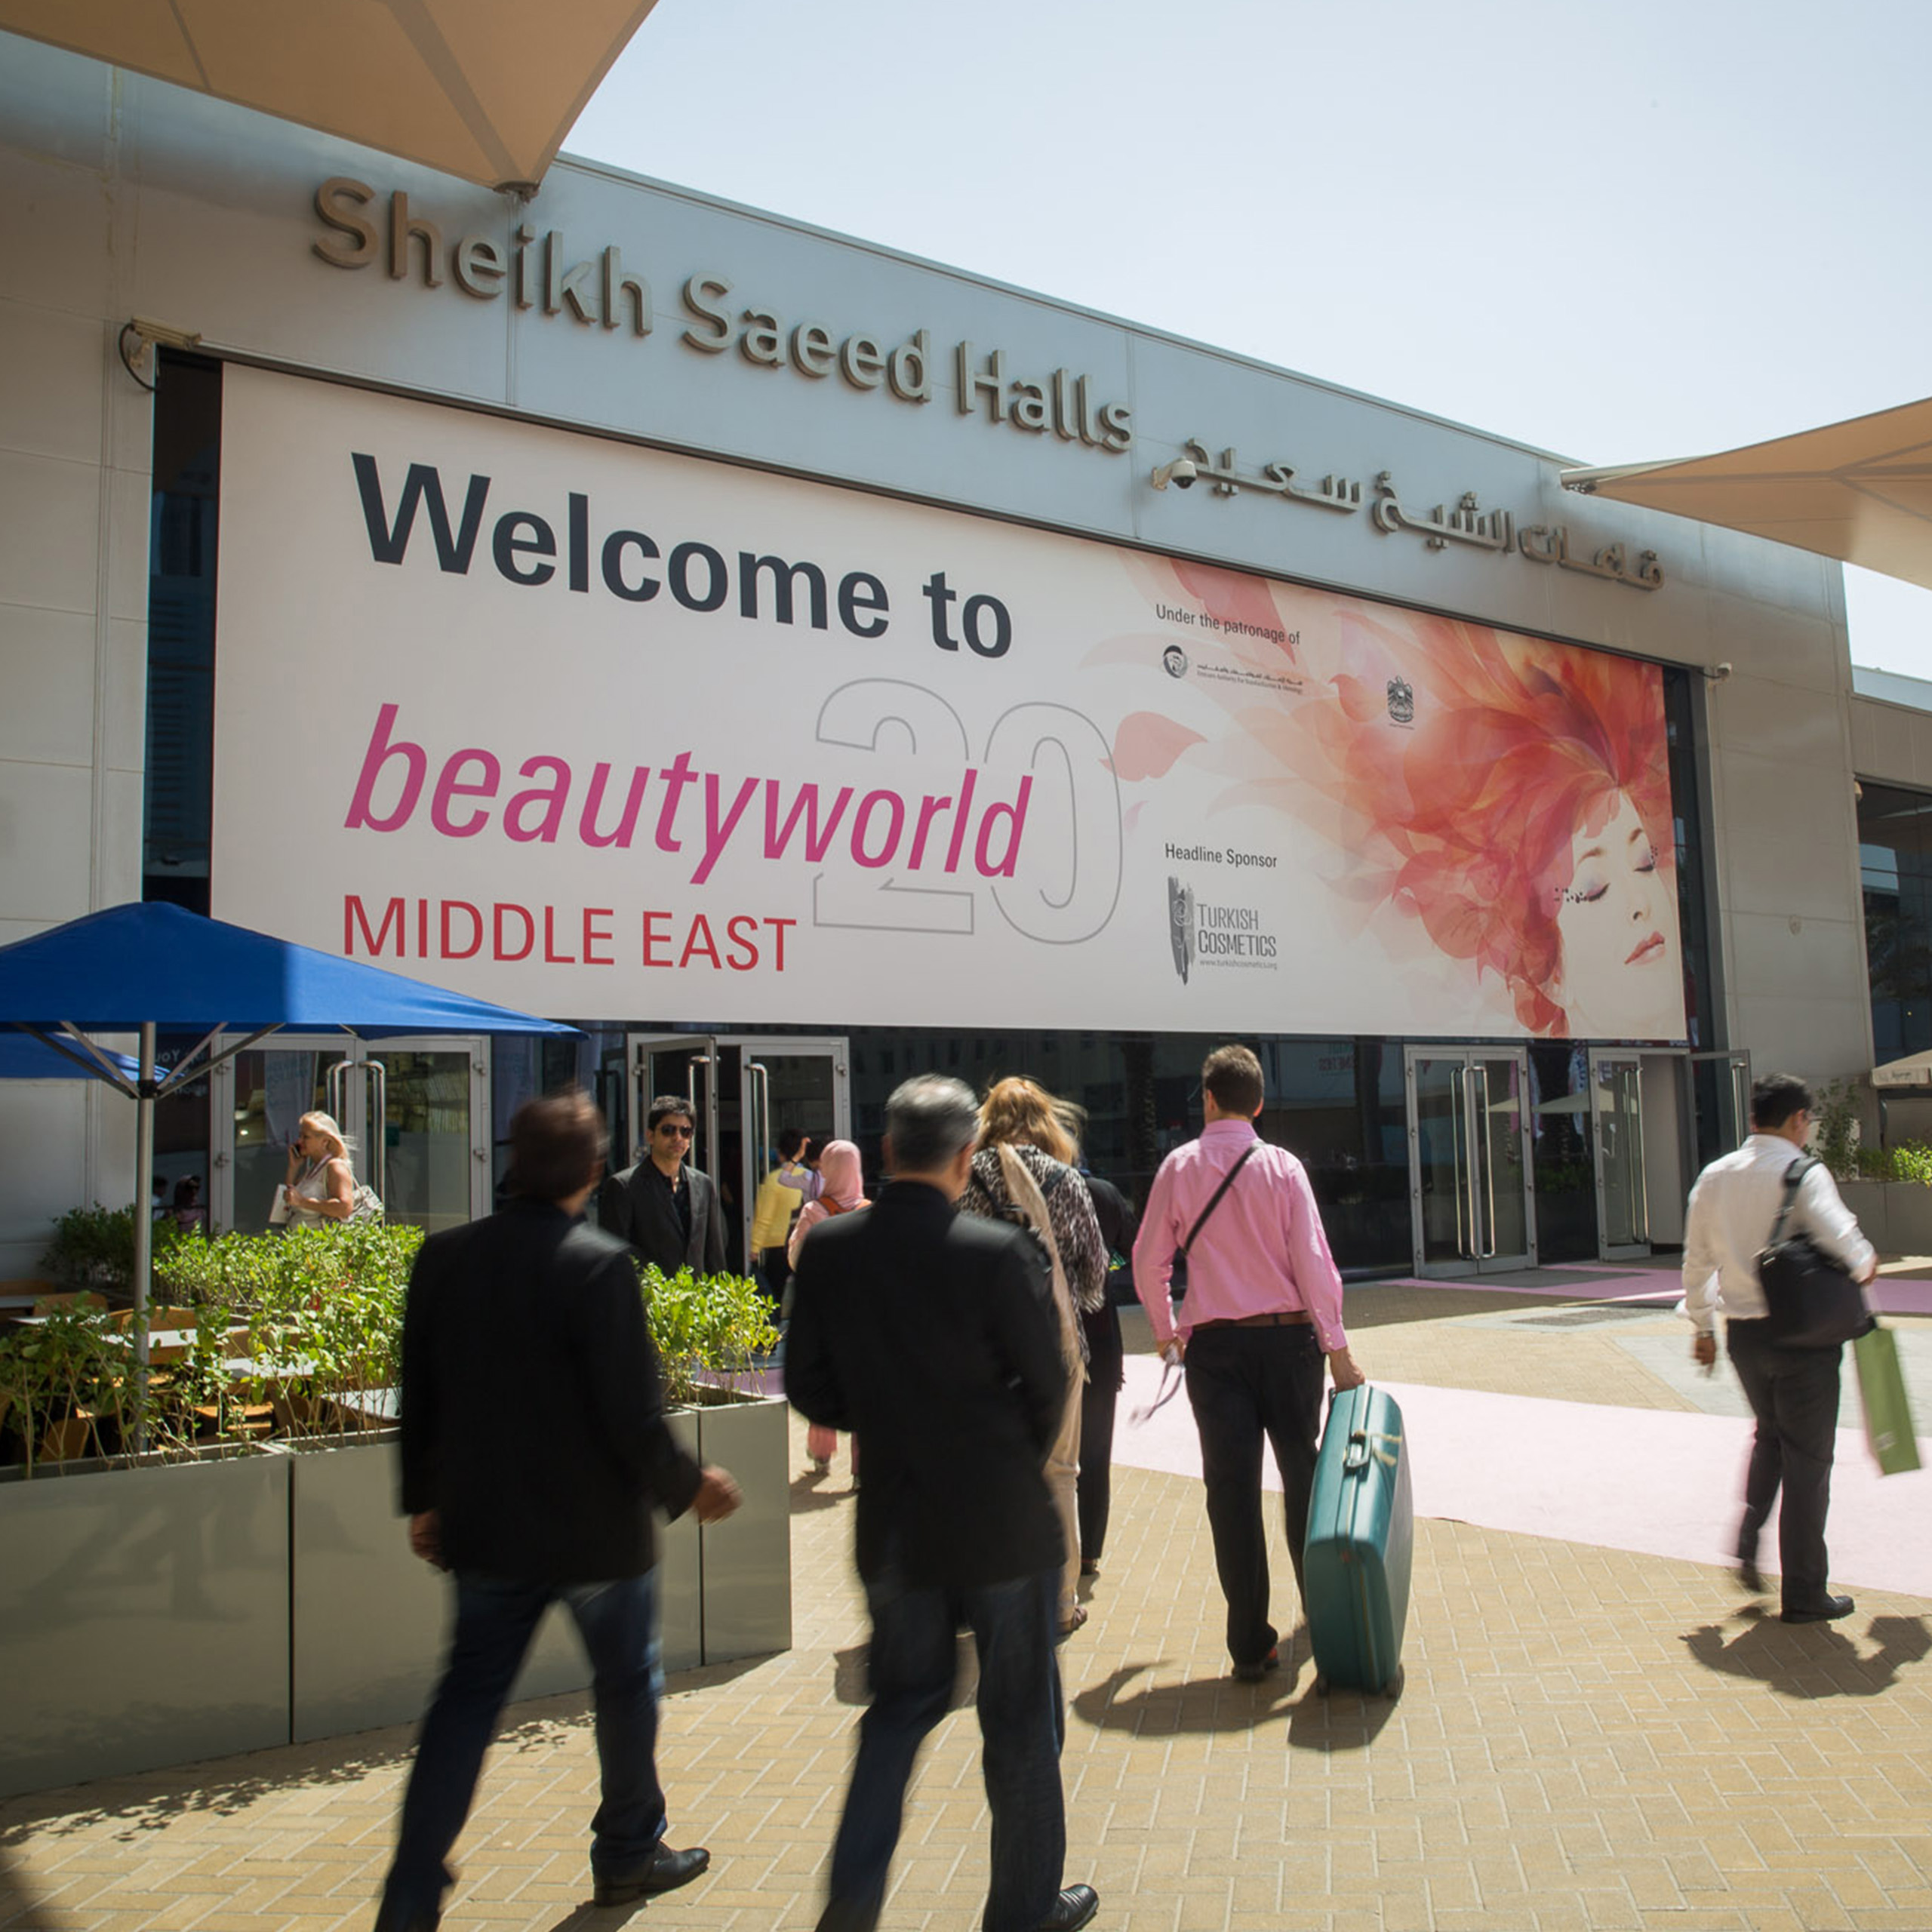 Beautyworld Middle East 2015 concludes 20th anniversary celebrations